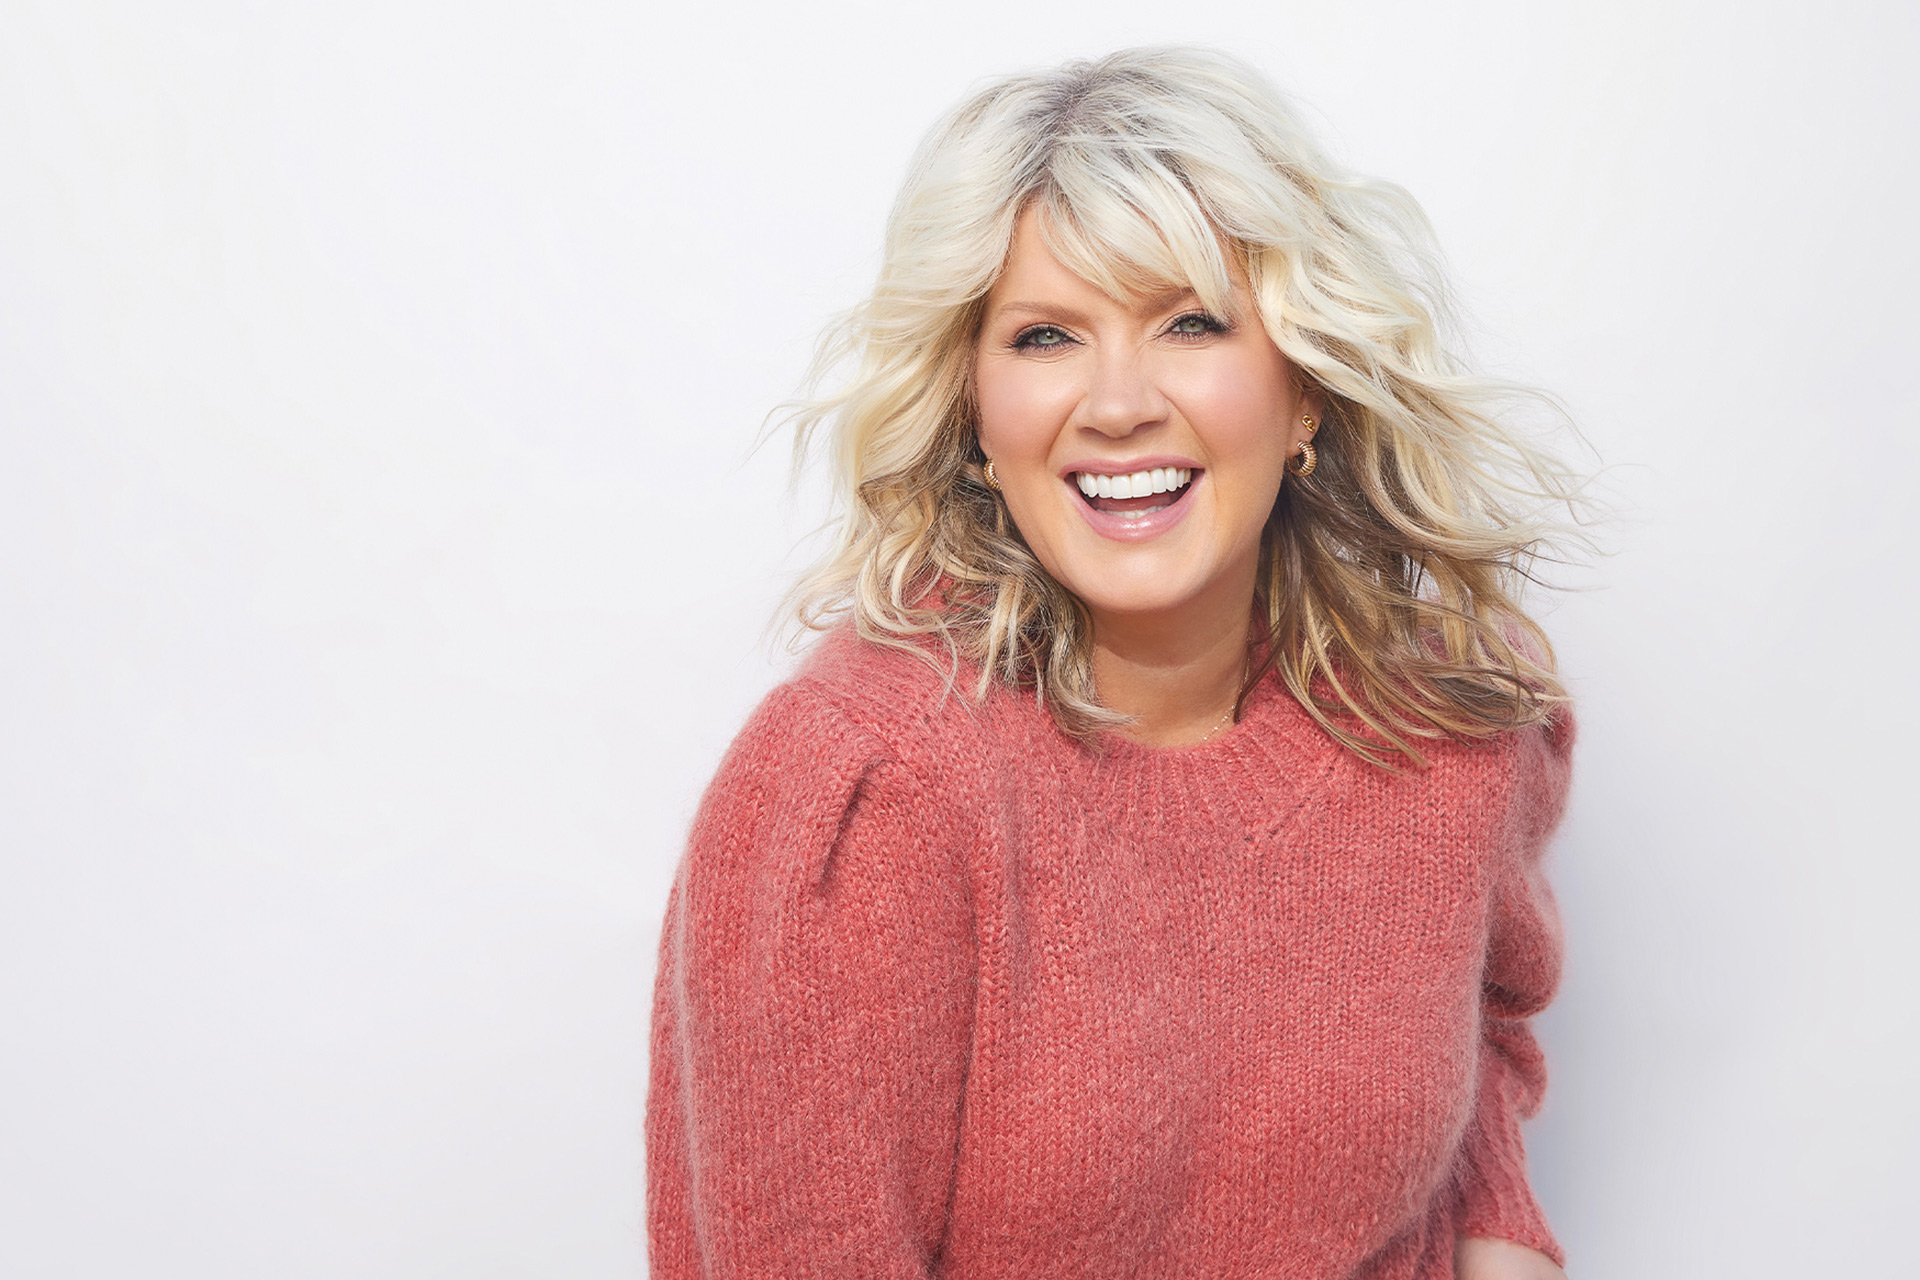 NINE-TIME GRAMMY AWARD NOMINEE NATALIE GRANT RELEASES OFFICIAL MUSIC ...